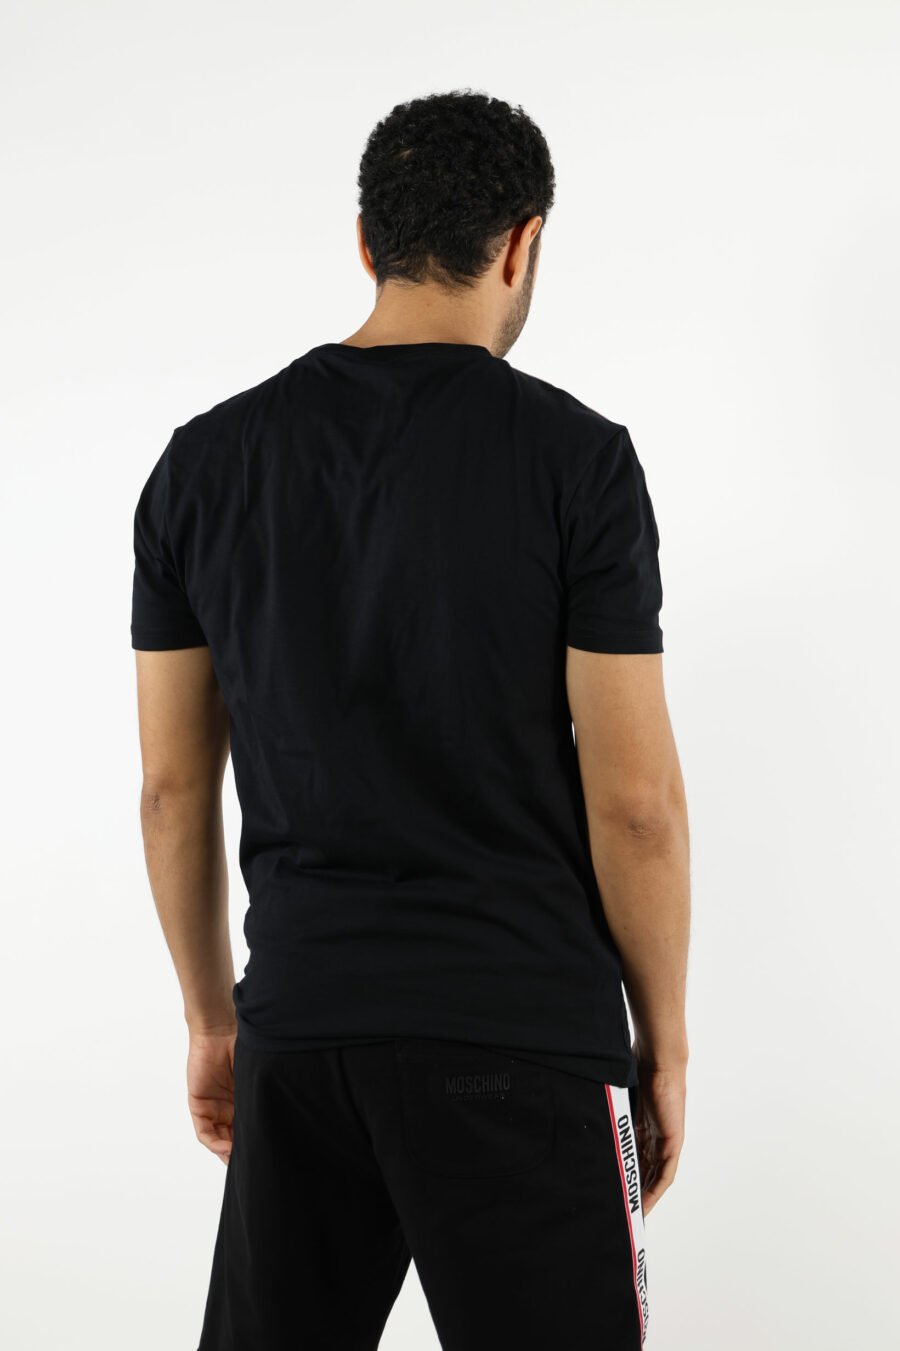 Black T-shirt with white logo with red ribbon detail on shoulders - 110982